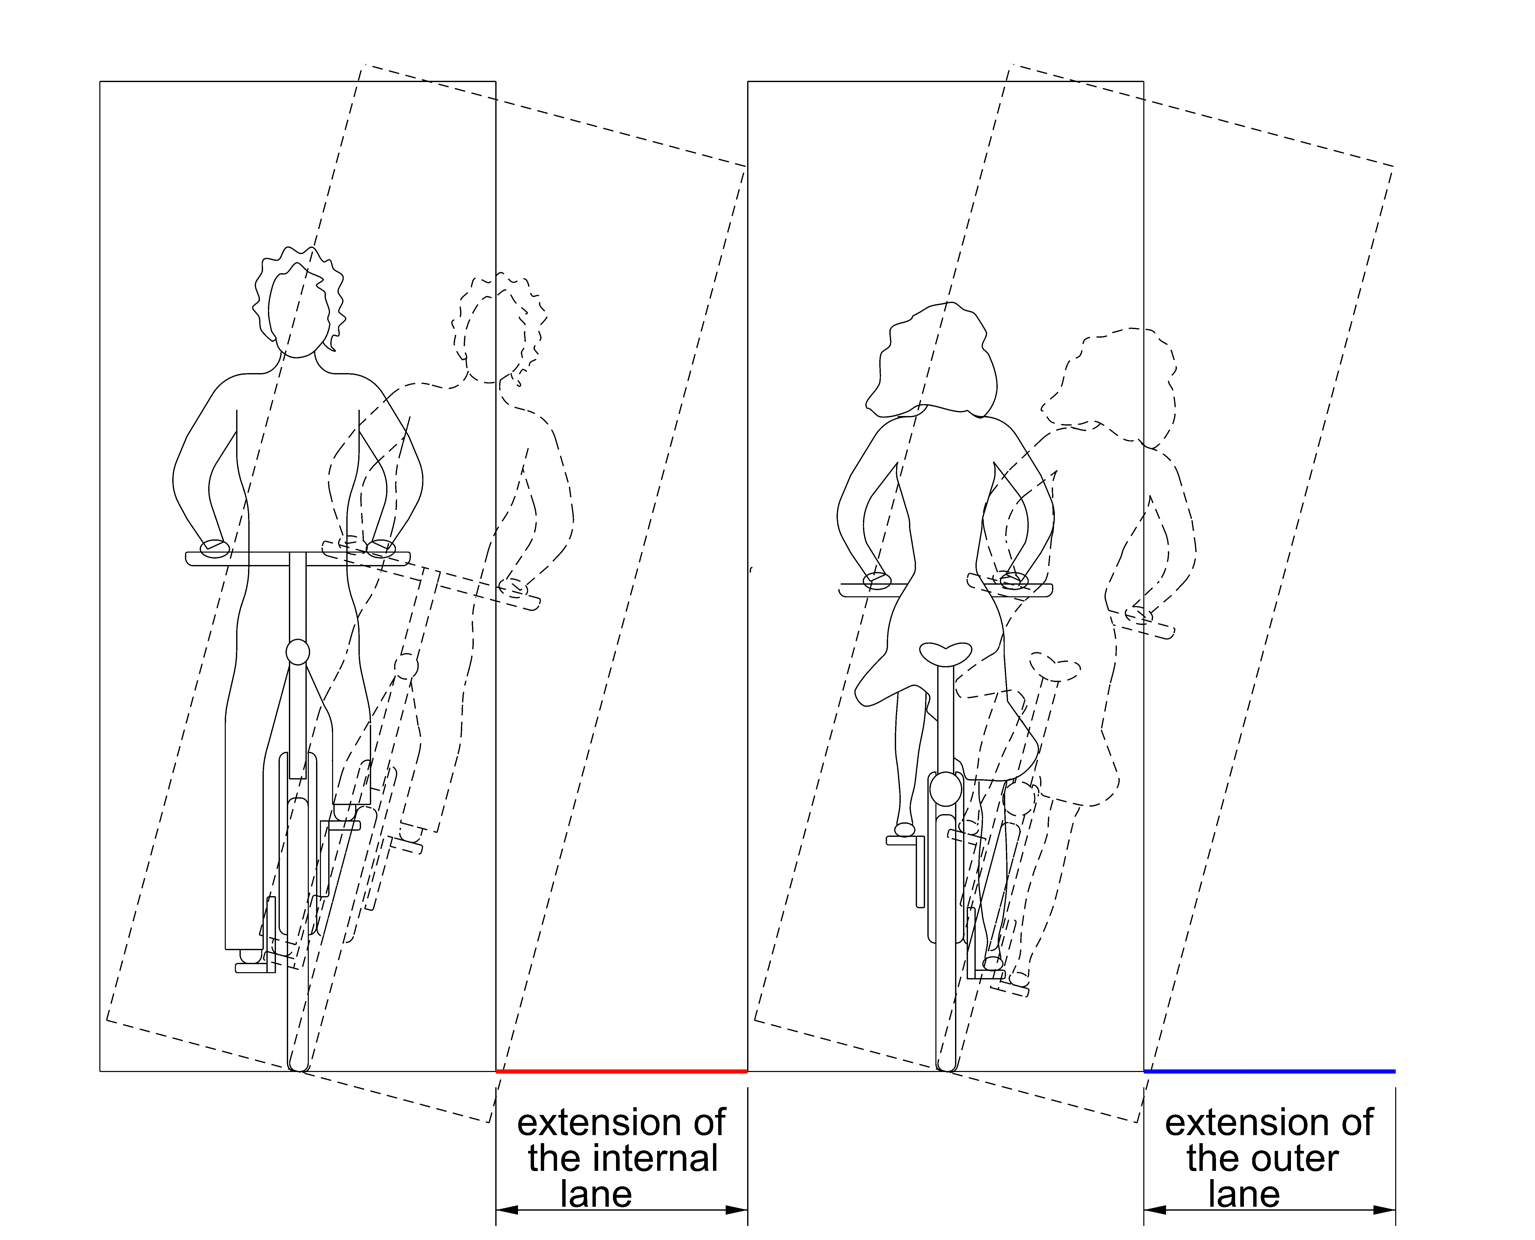 Fig. 4. Outline of spaces occupied by bicycle riders along with widening marked.